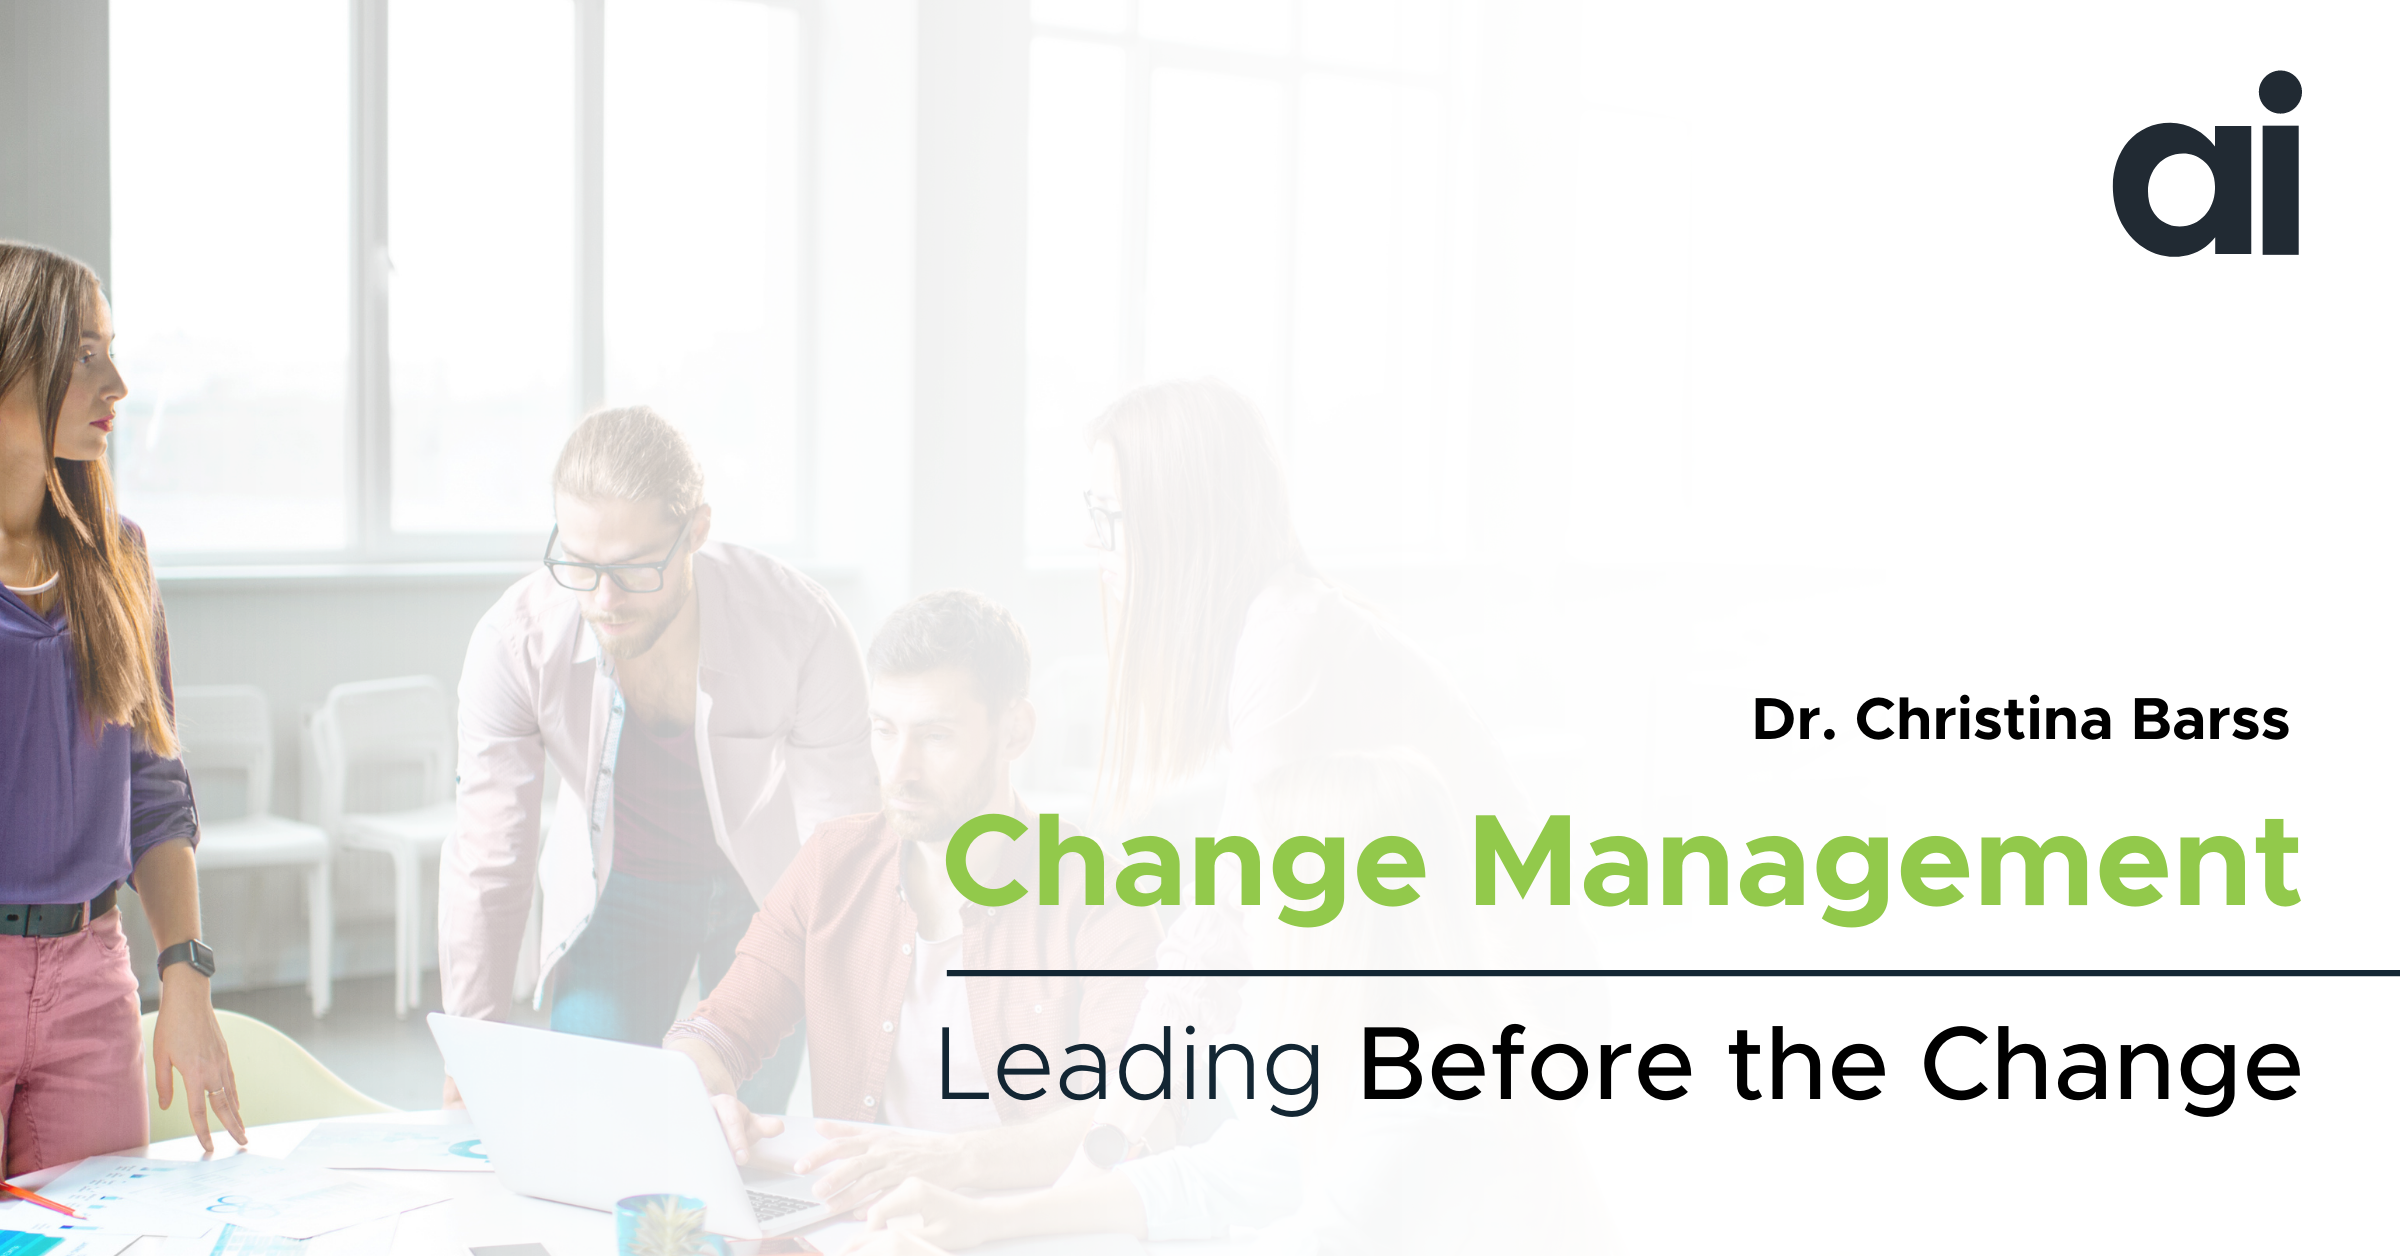 Change Management: Leading Before the Change